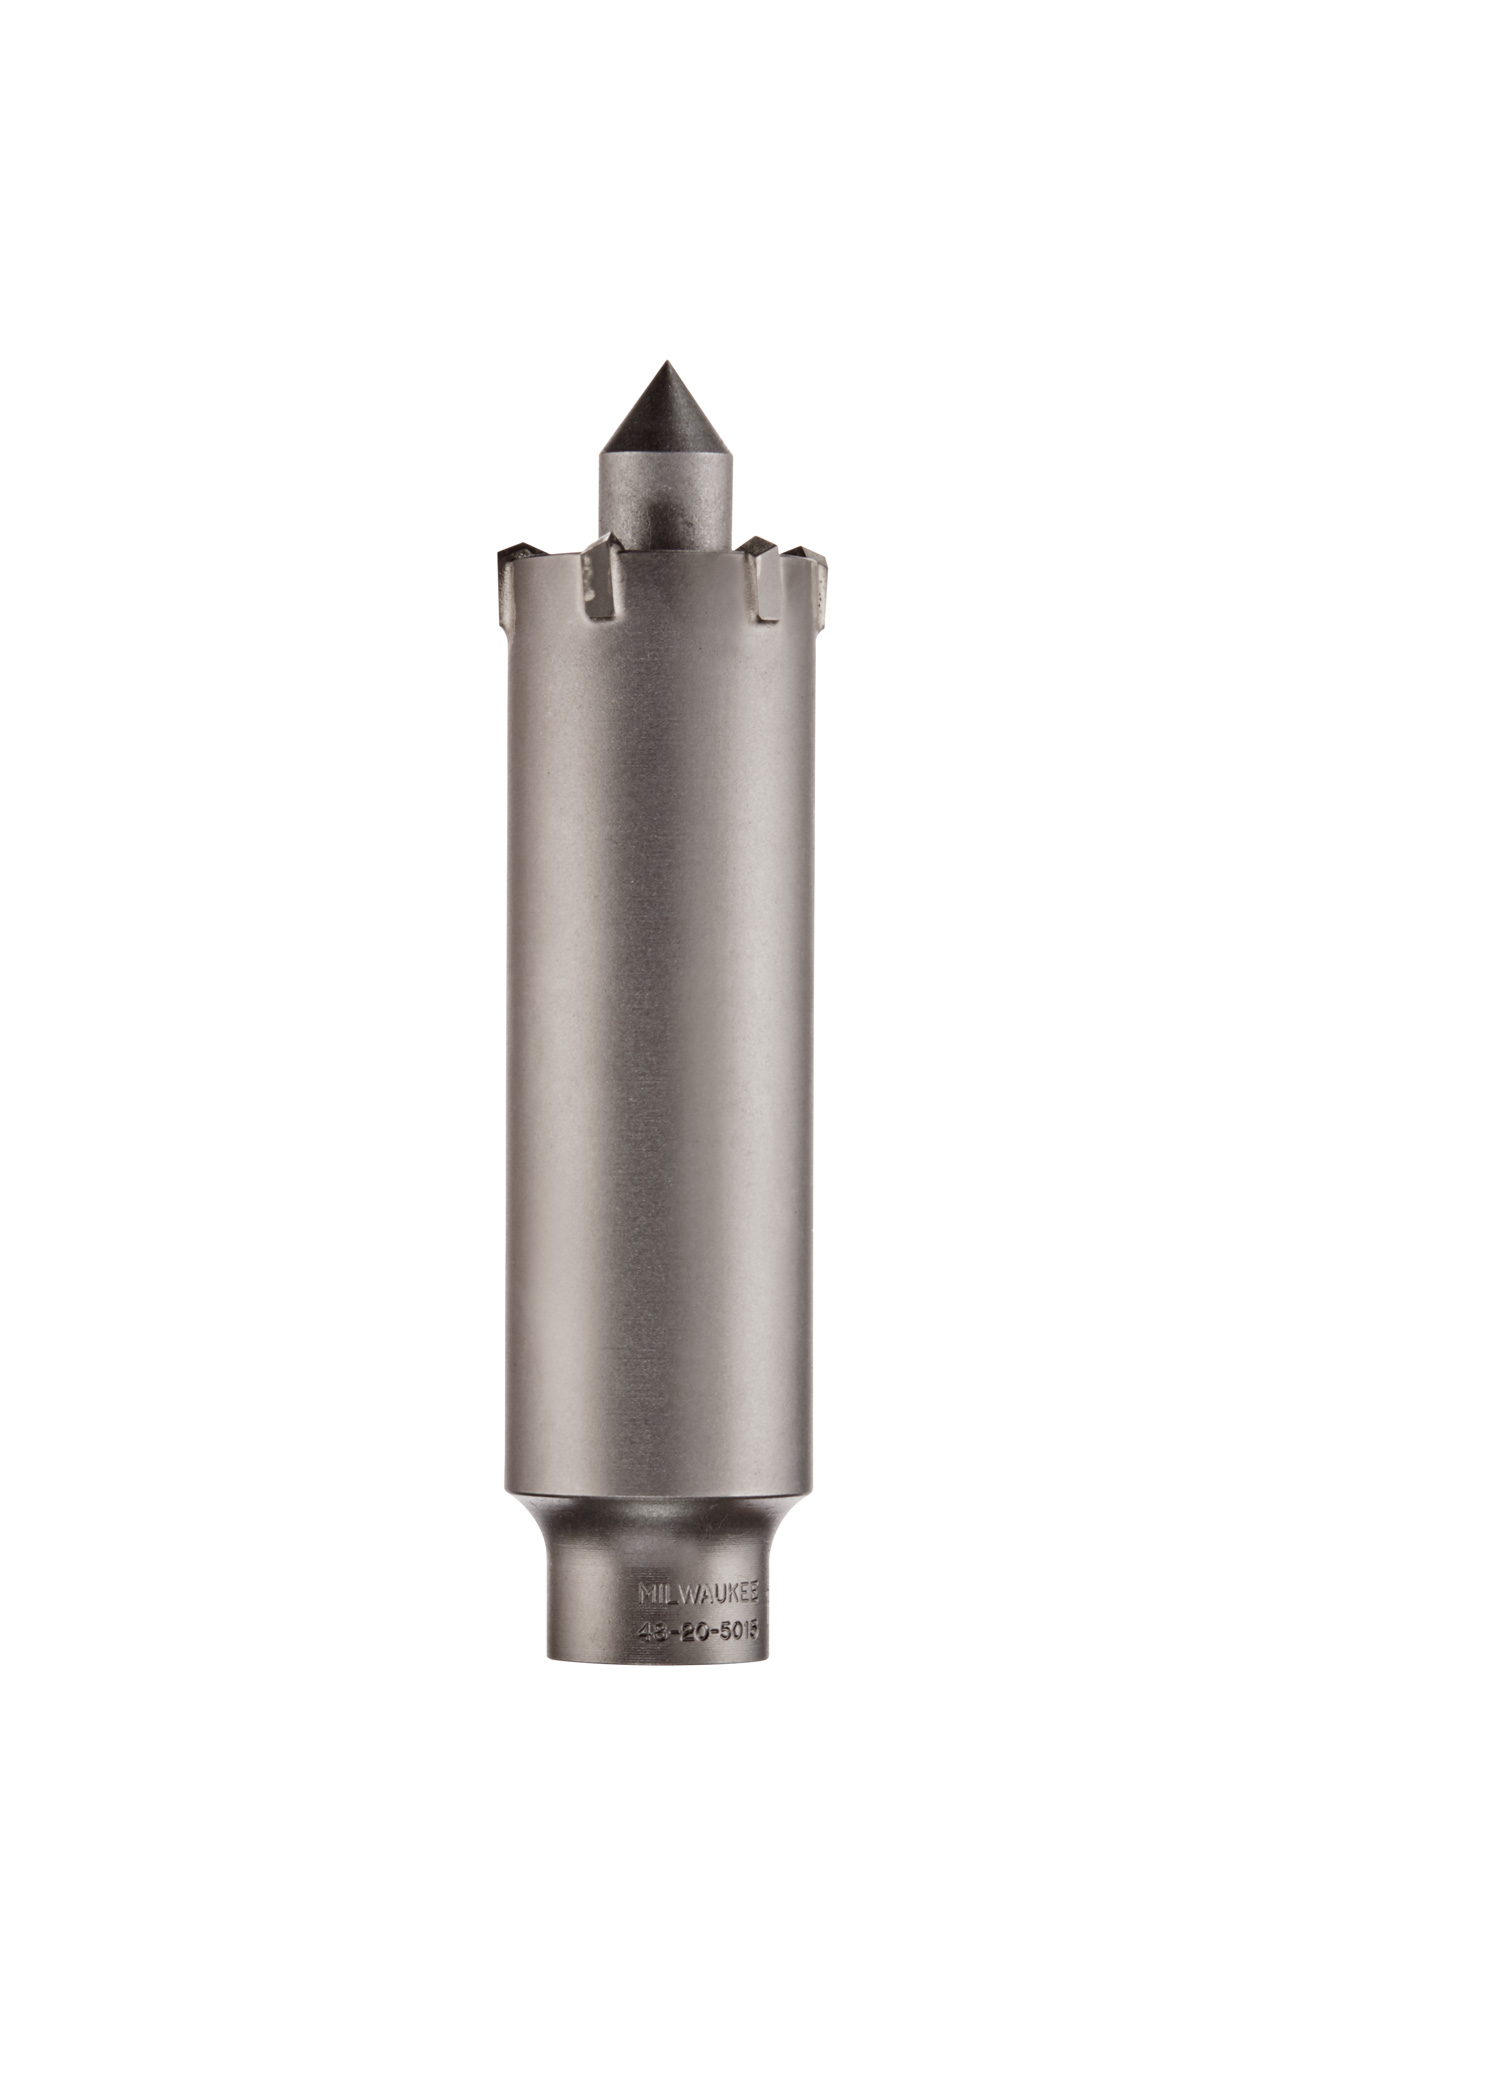 SDS-Plus Thin Wall Carbide Tipped Core Bit 1-1/4 in.